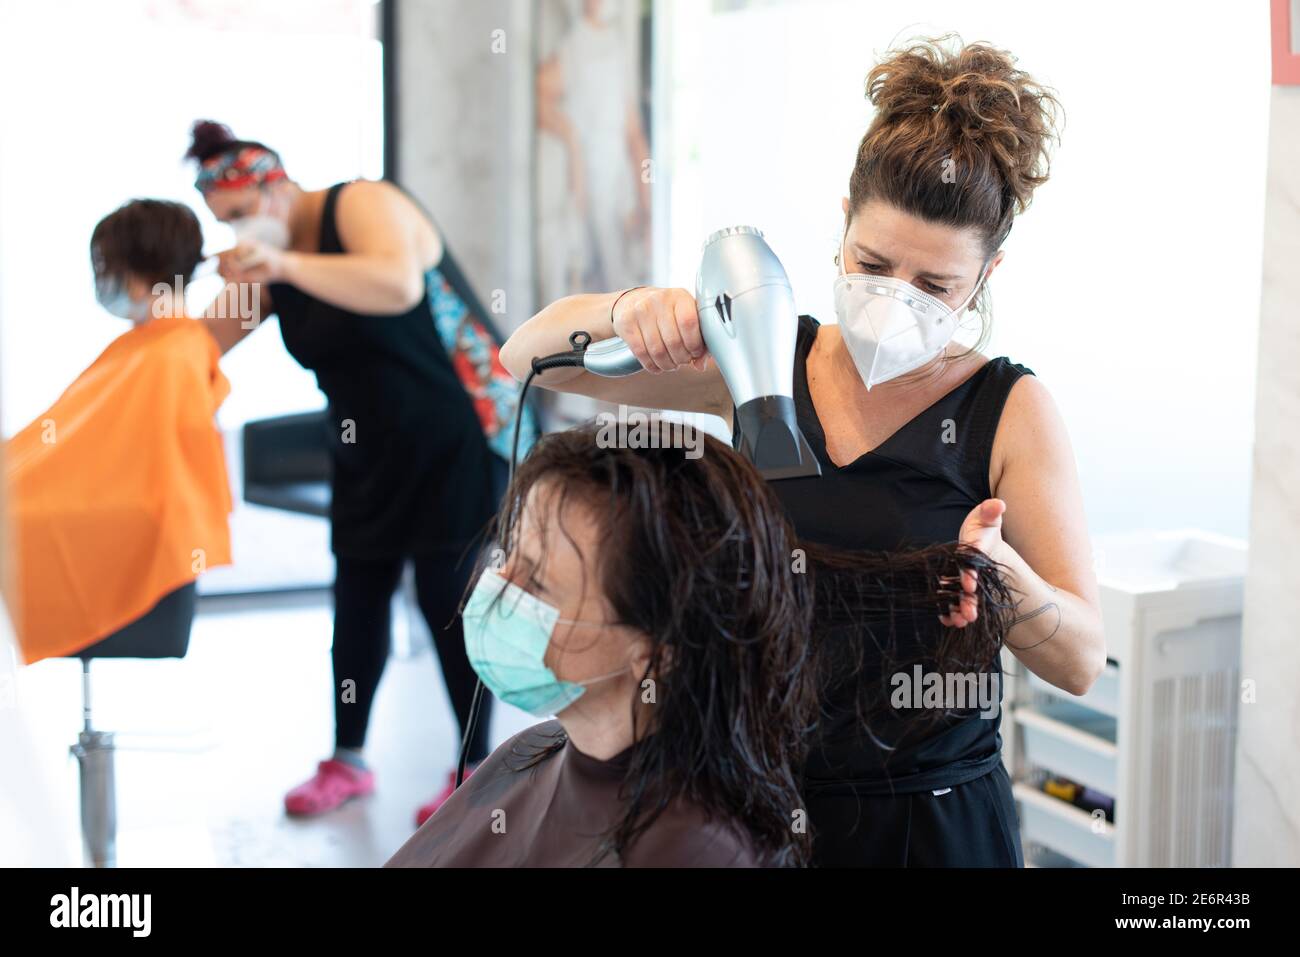 Working during covid-19 or coronavirus concept. A professional hairstylist cutting the hair to a client with a face mask. Stock Photo